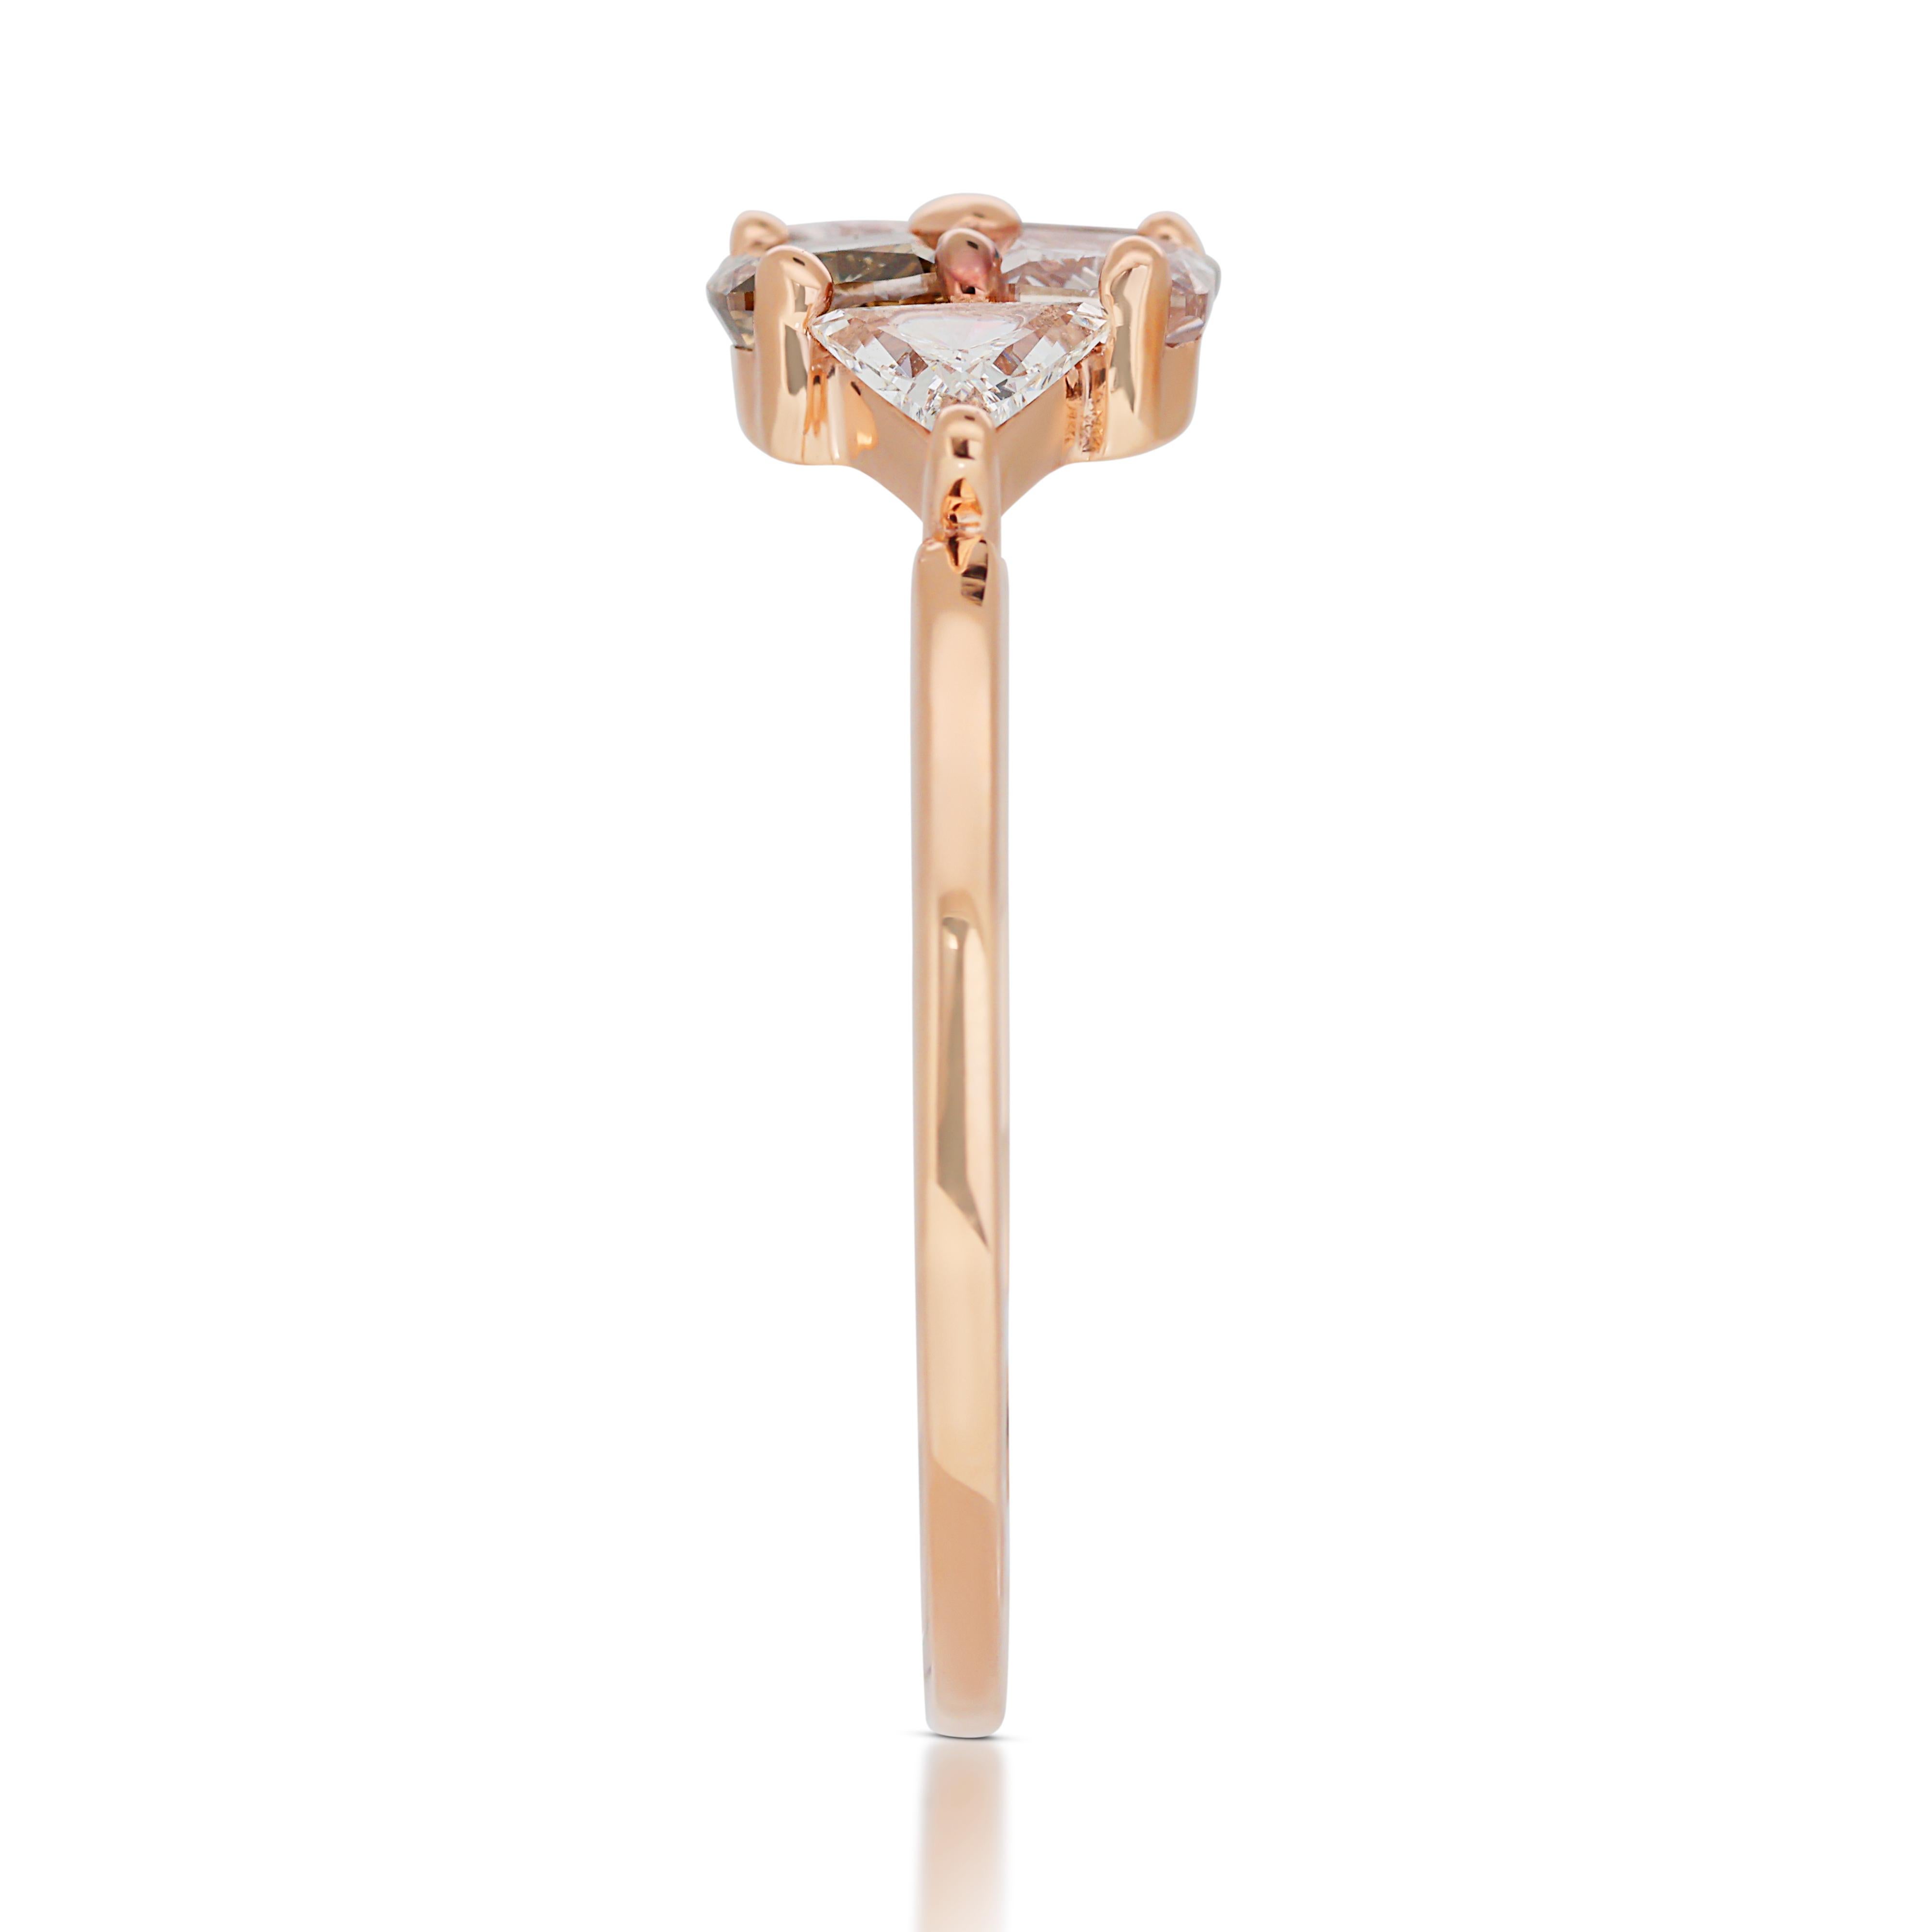 Vibrant One-of-a-Kind 14k Rose Gold Fancy-Colored Diamond Ring w/1.31 ct  For Sale 1